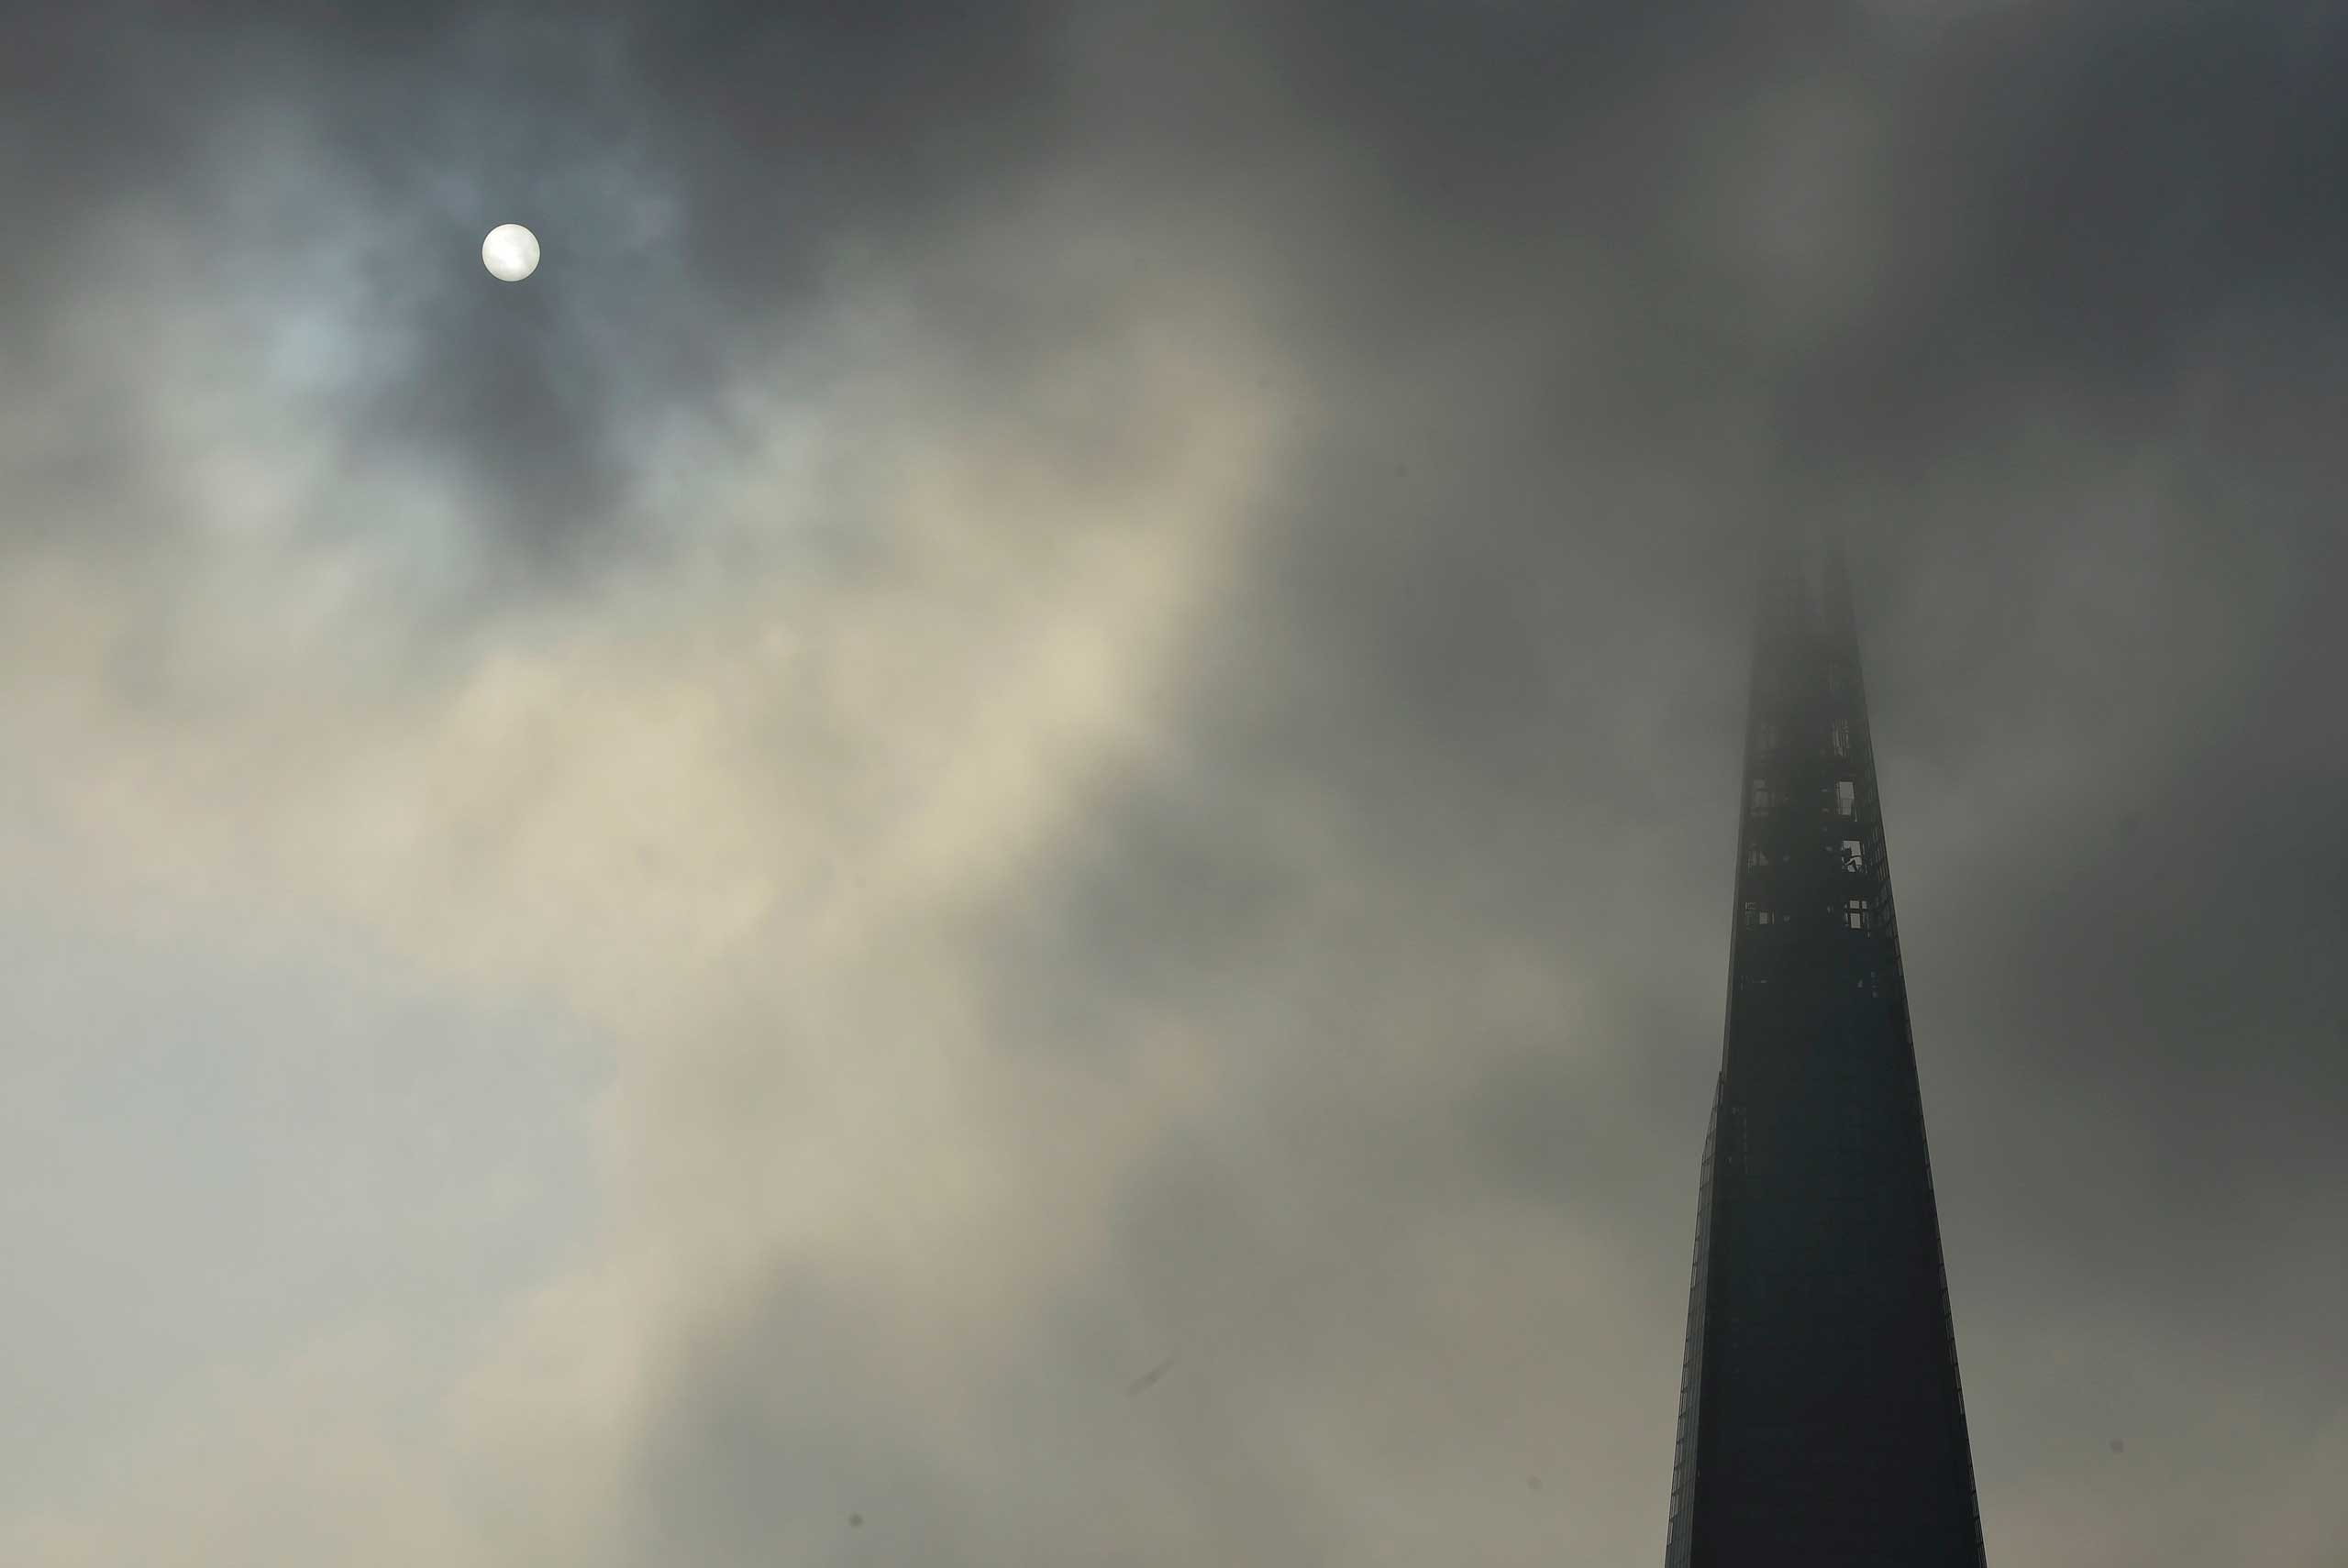 Sept. 19, 2014. The sun begins to shine through morning fog next to the Shard in central London.